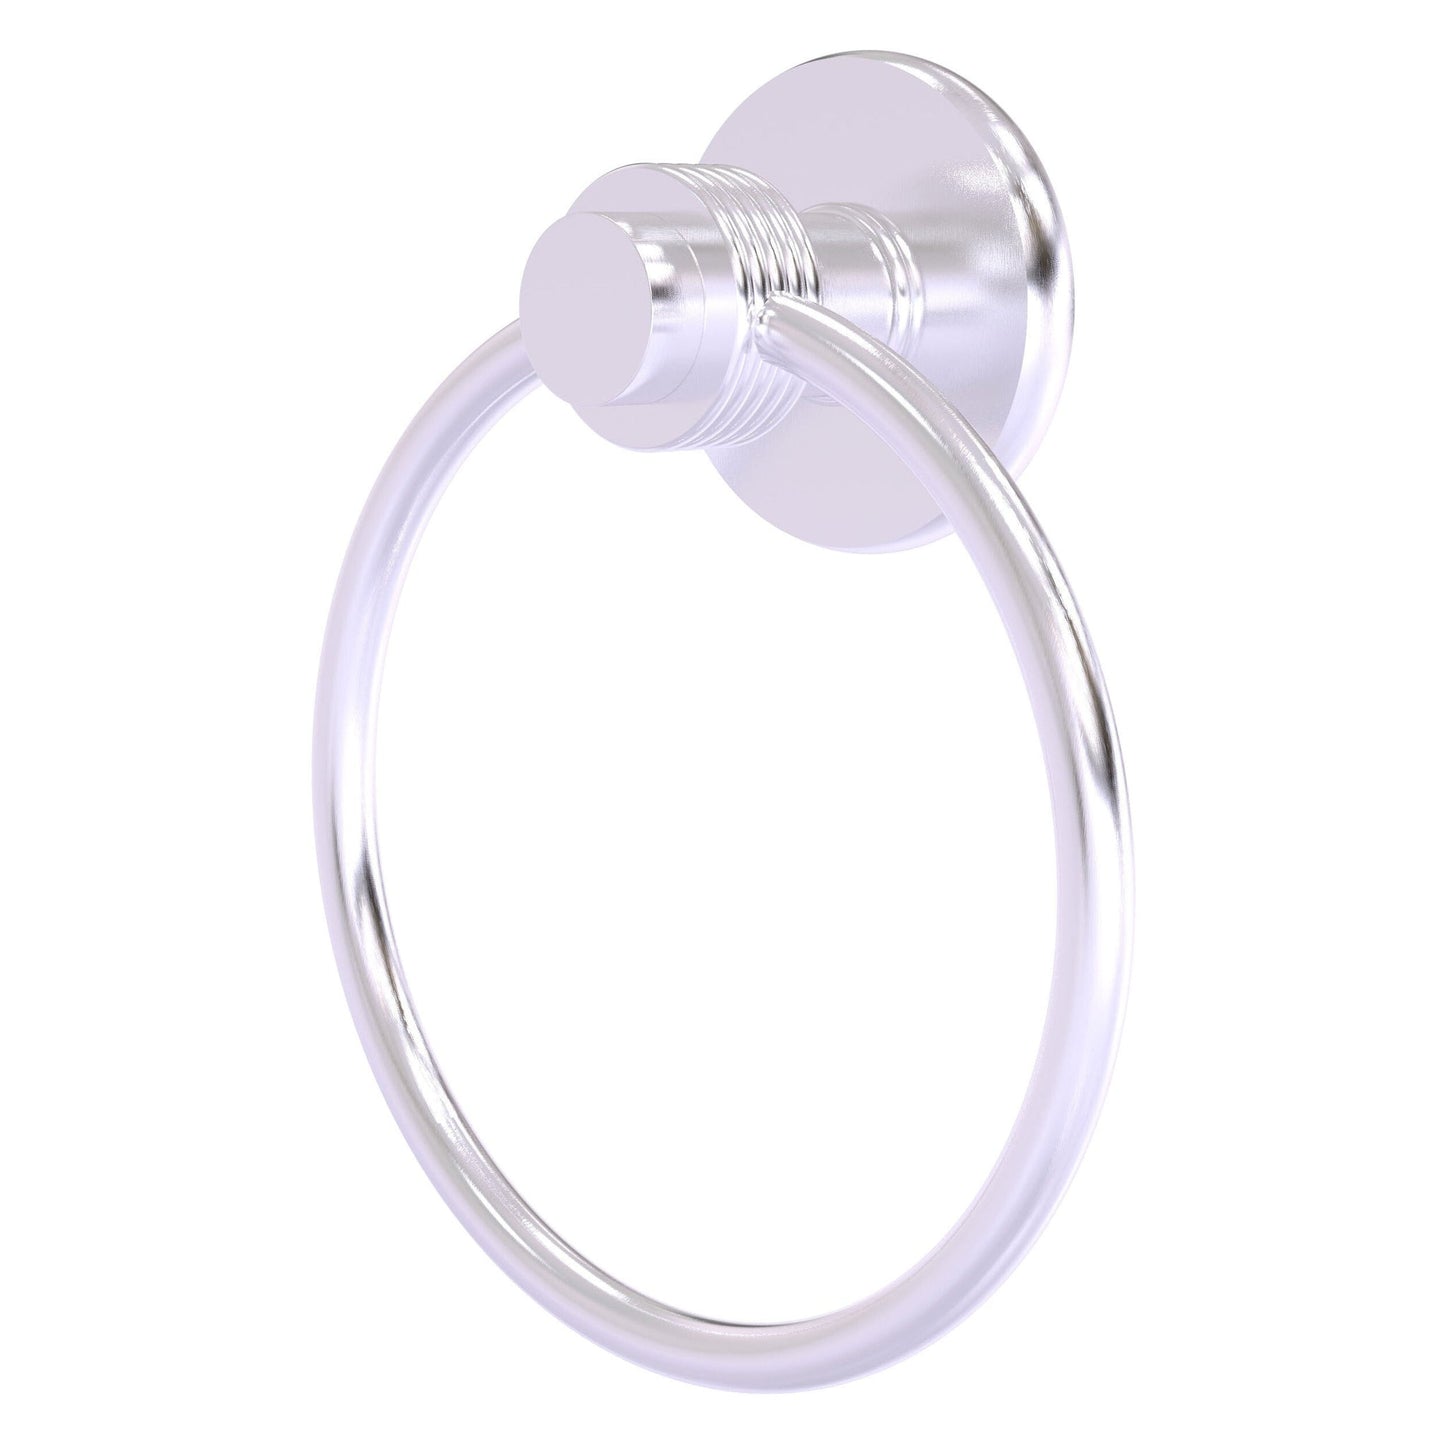 Allied Brass Mercury 6" x 2" Satin Chrome Solid Brass Towel Ring With Grooved Accent